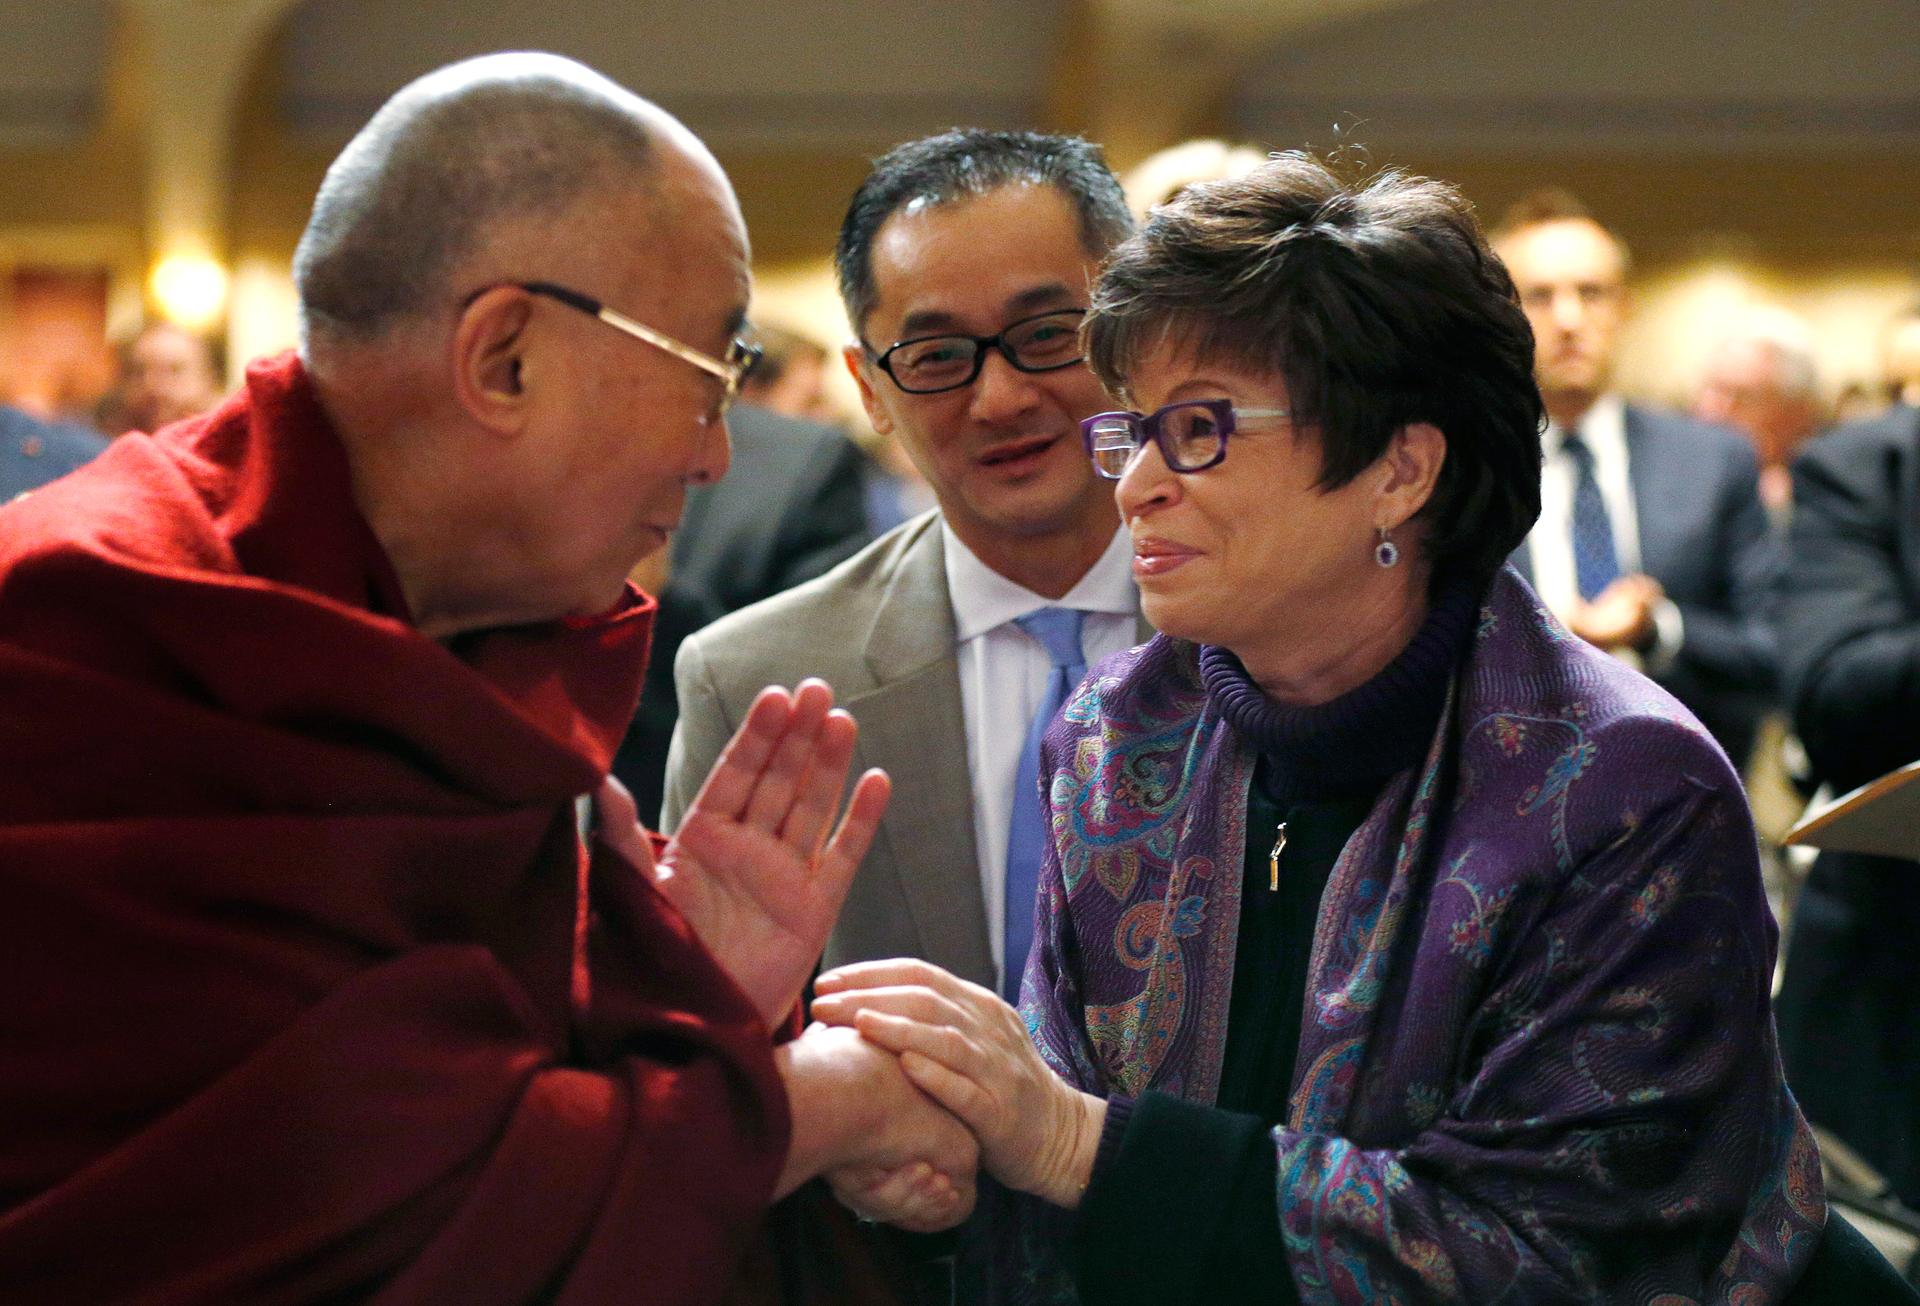 Here is the Dalai Lama not meeting with President Obama on February 5, 2015, in Washington. Instead, he is shaking hands with Valerie Jarrett, a senior advisor to the US president. 